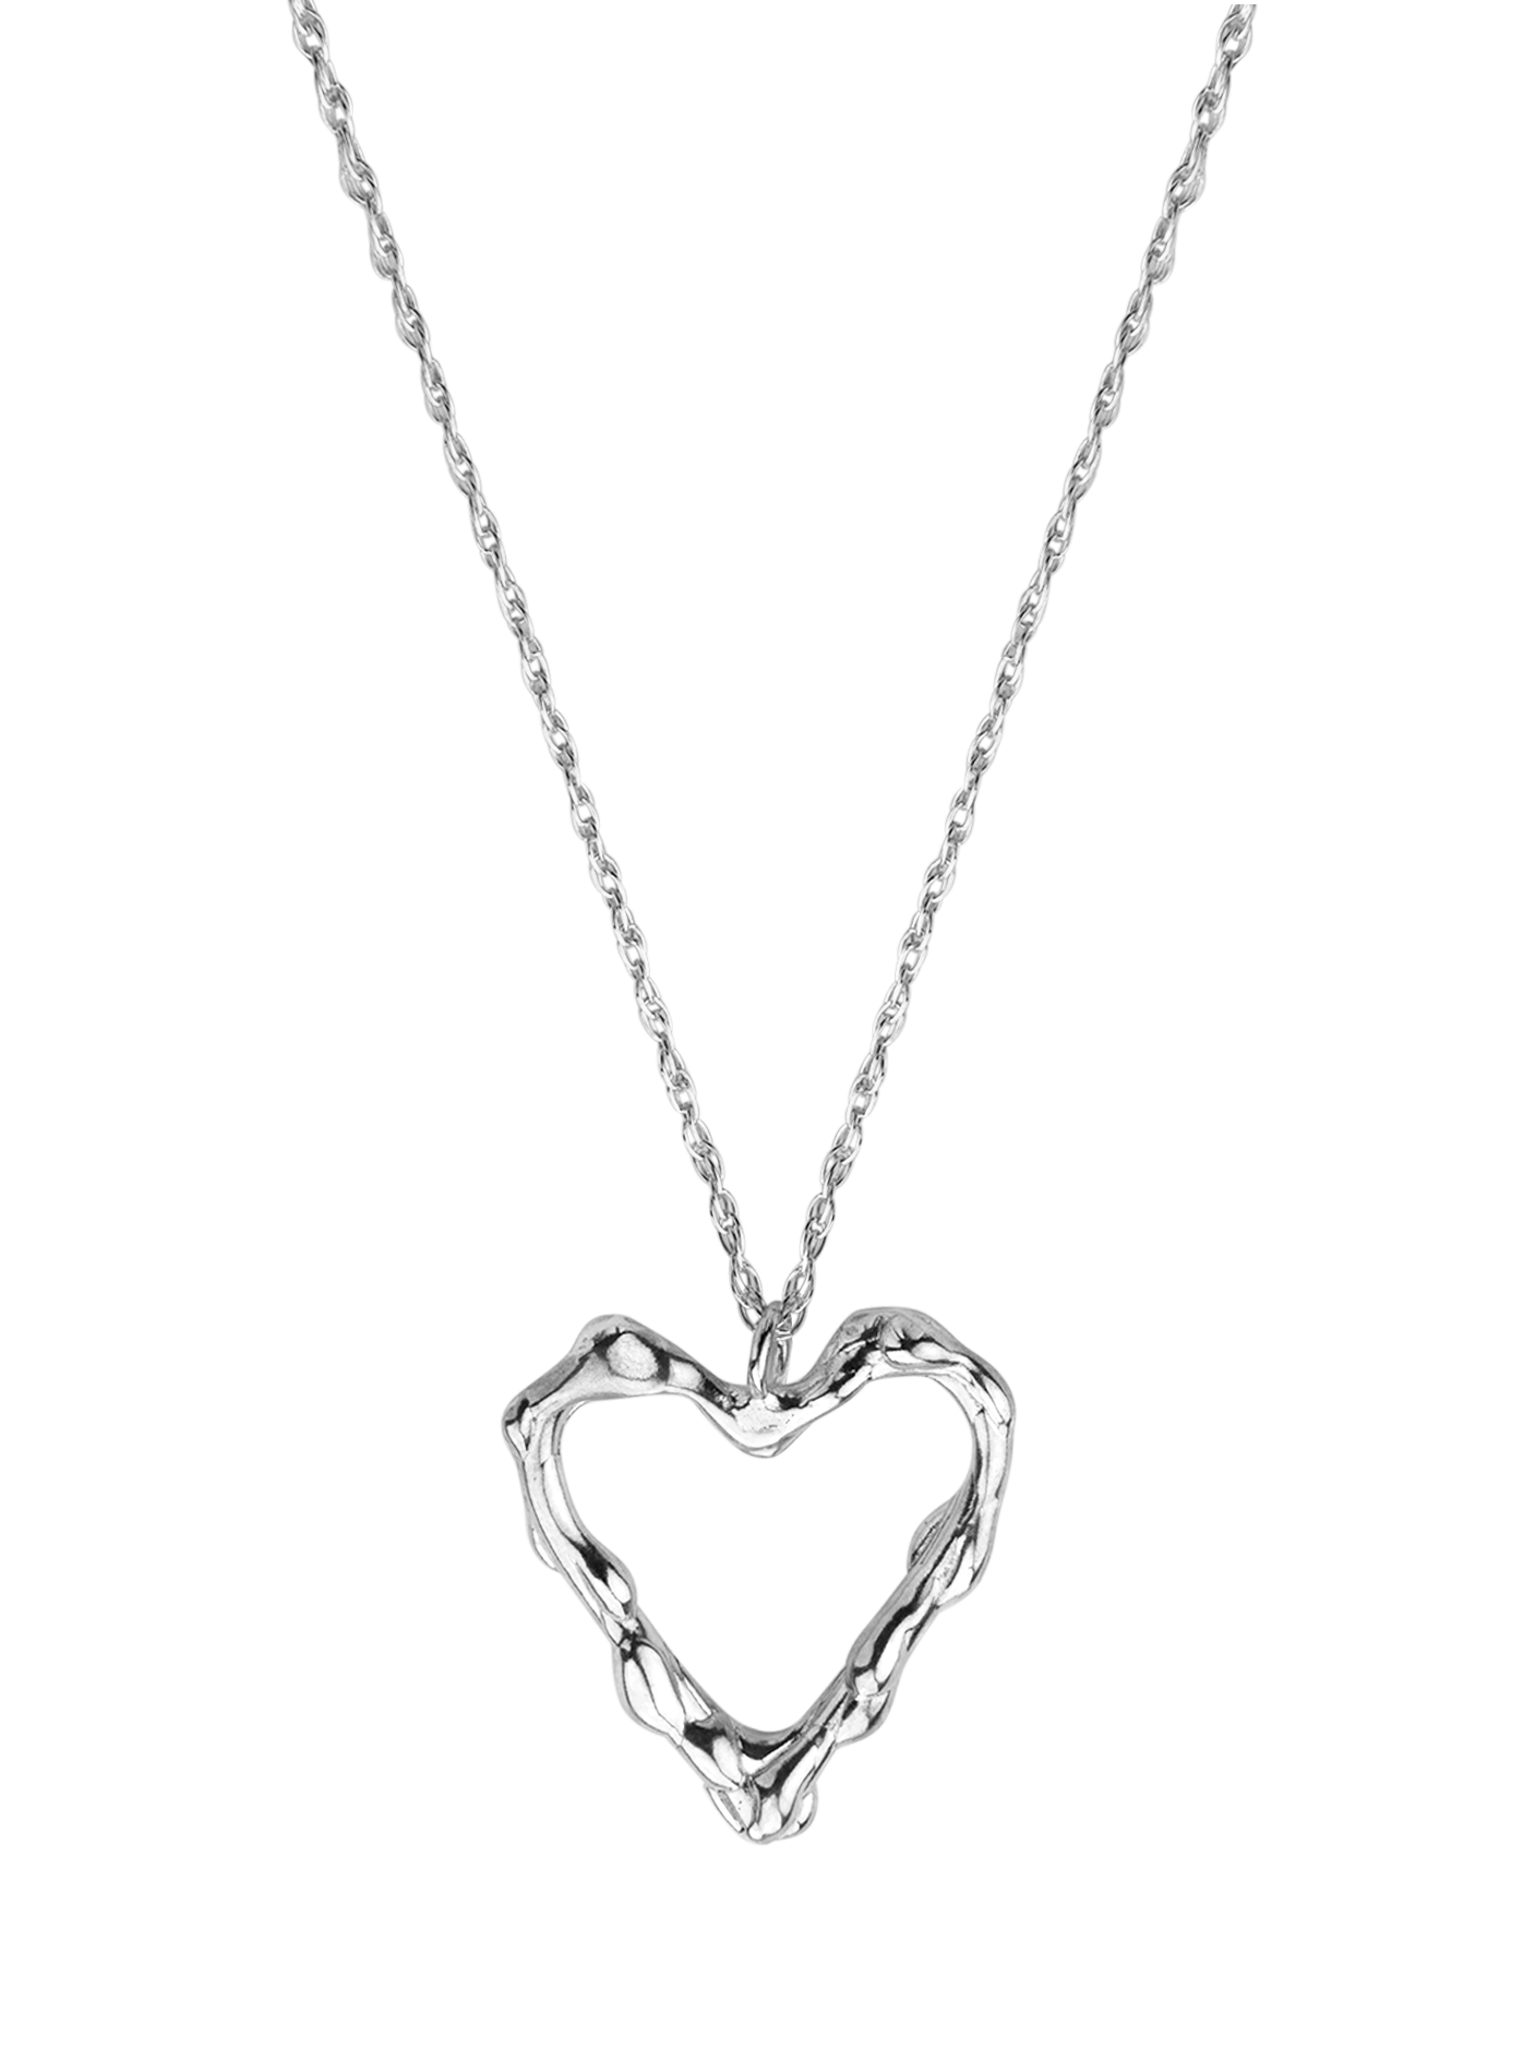 Melted heart pendant